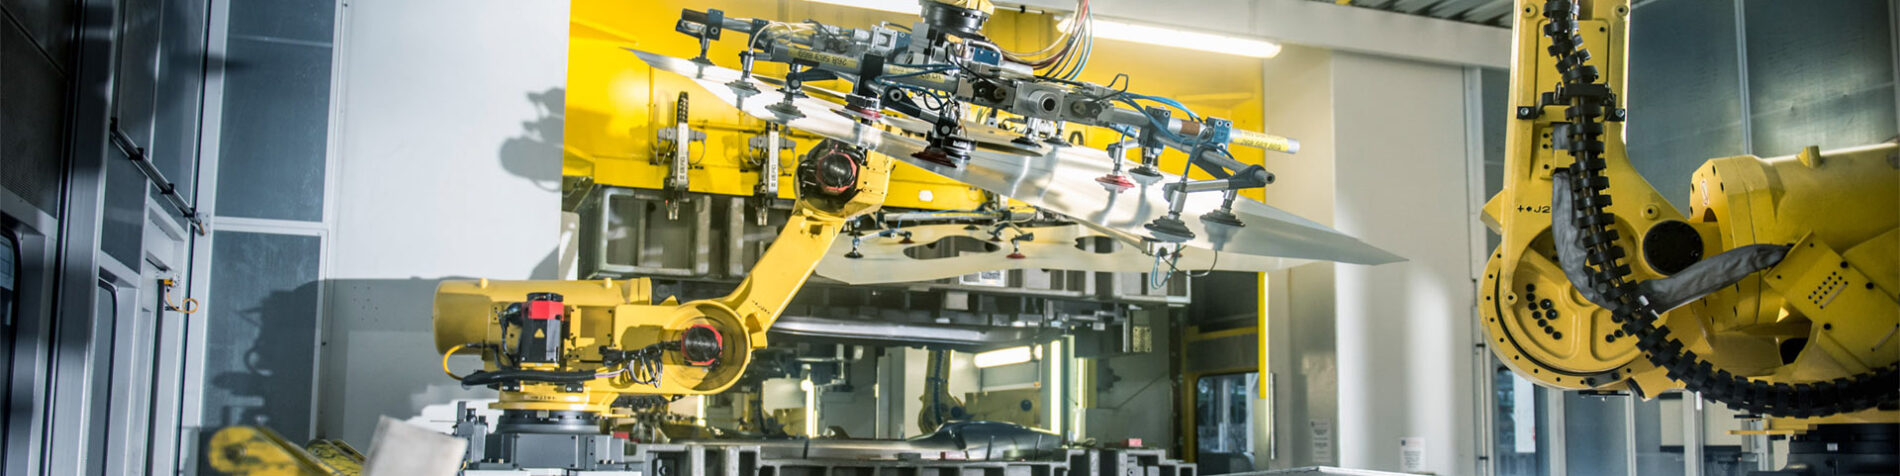 How Manufacturers Supercharge Massive Supply Chain Advantage with Industry 4.0